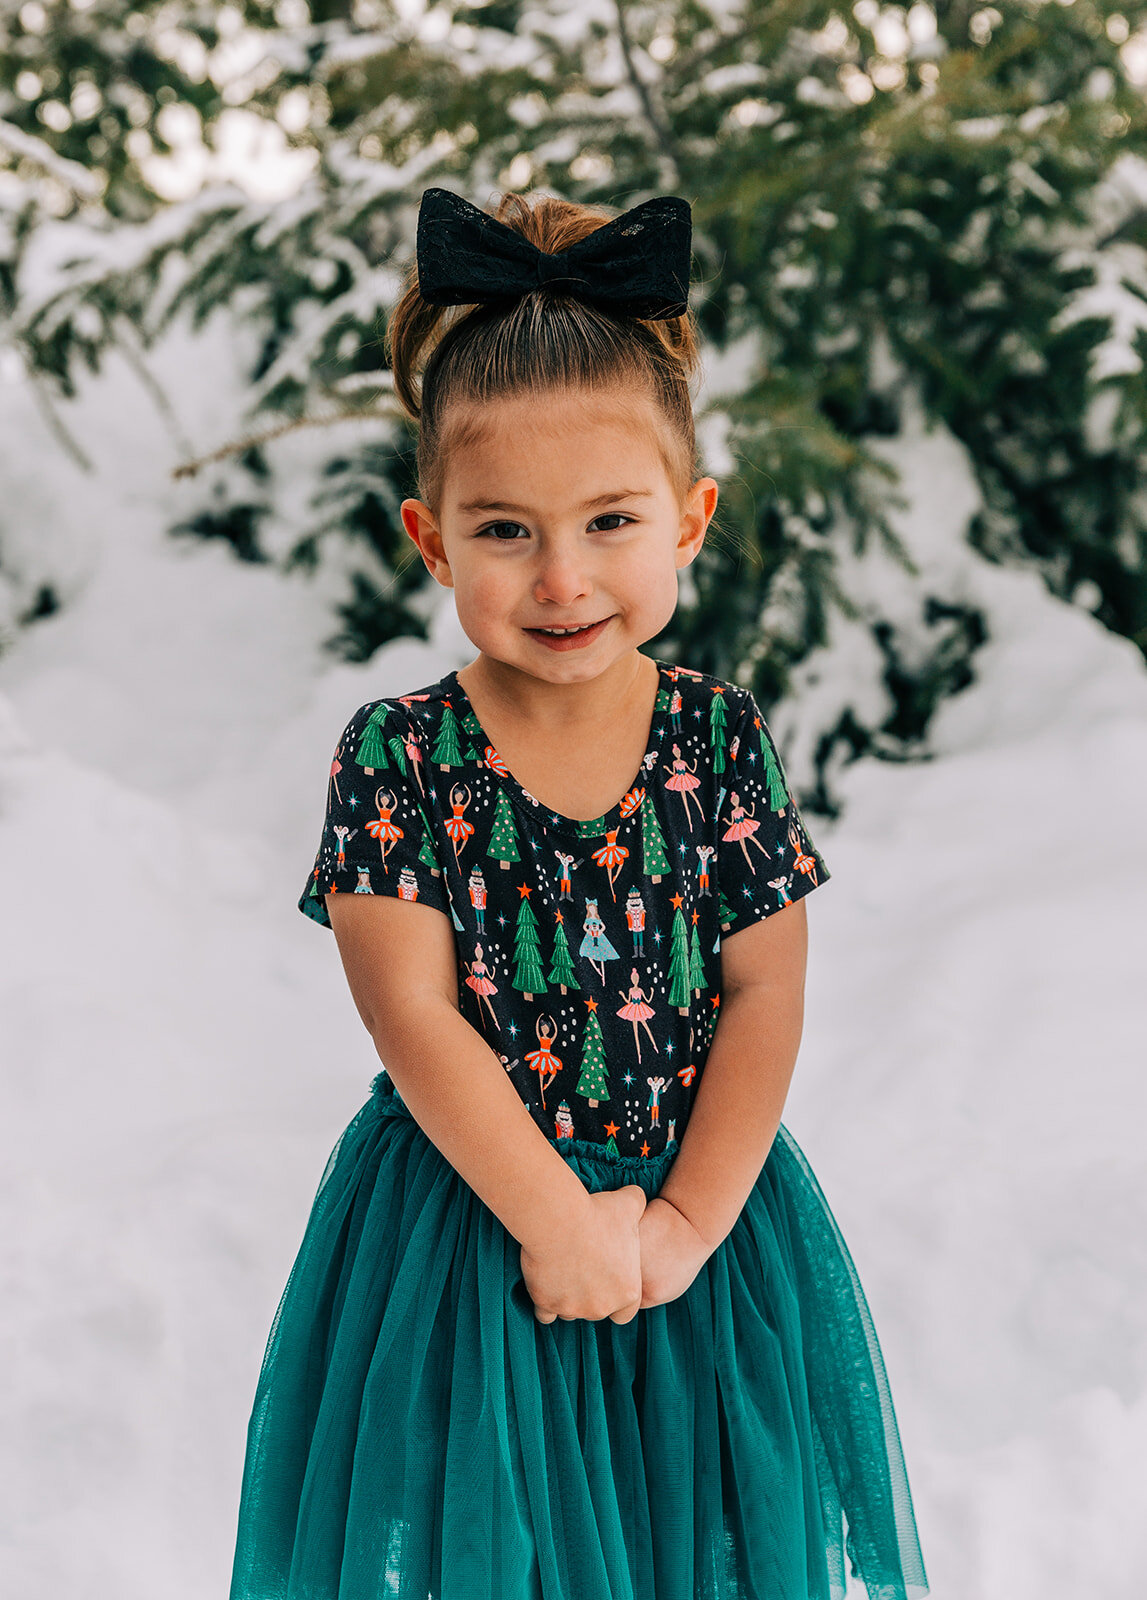  teal christmas tulle dress ponytail hairstyle ideas bow winter fashion family pictures daughters family picture styling inspiration family pose ideas winter photoshoot snowy pictures adams acres tree farm family photographers in utah professional fa